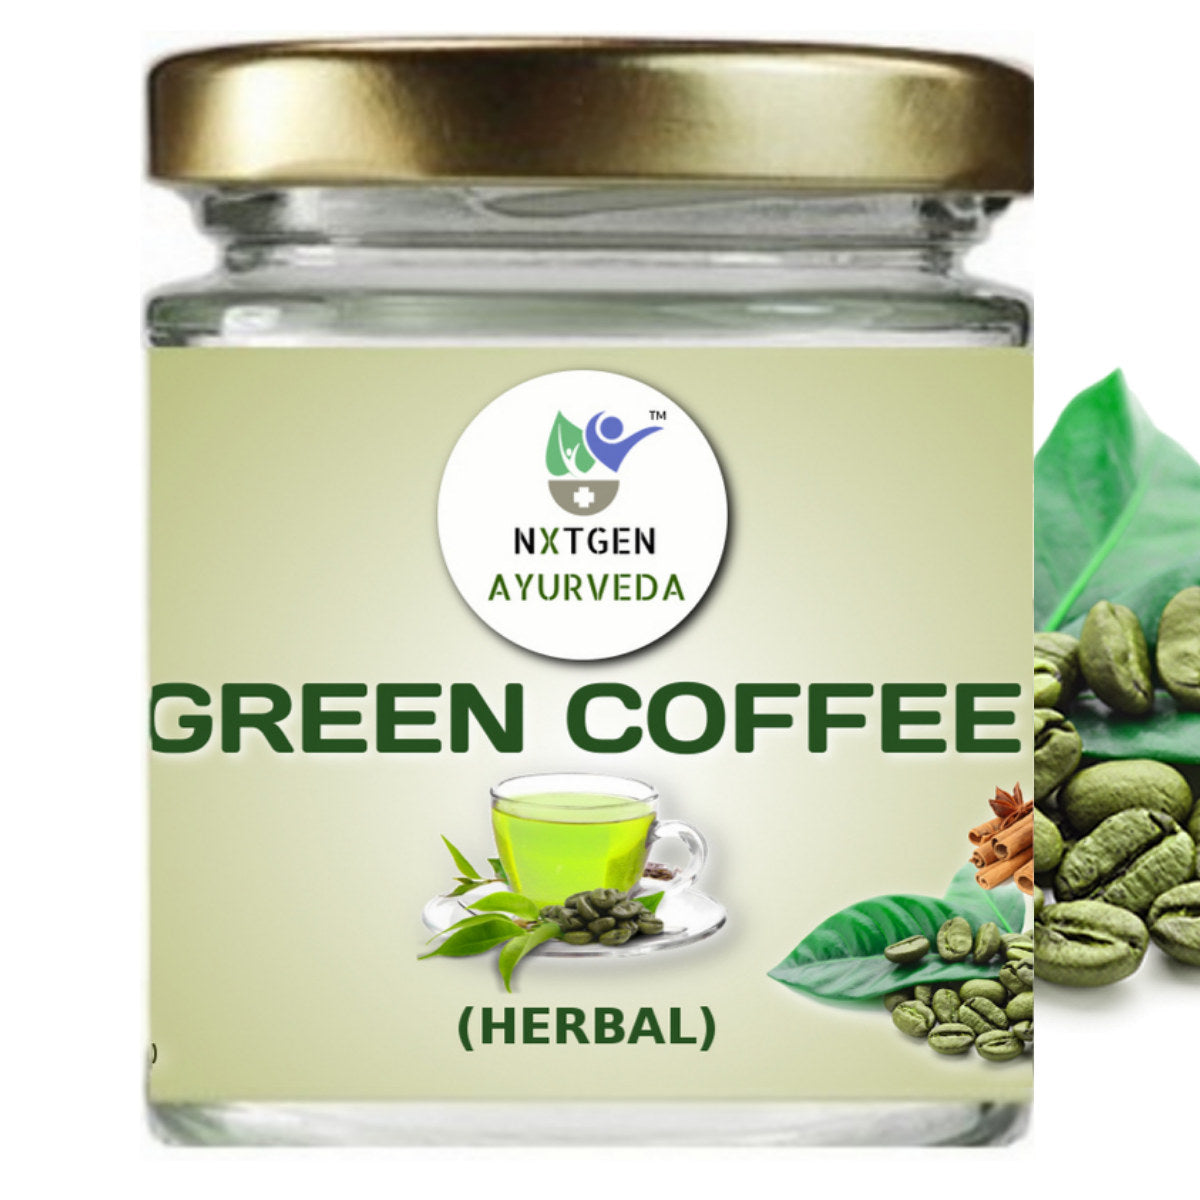 Green Coffee with Herbs - 100 Gms